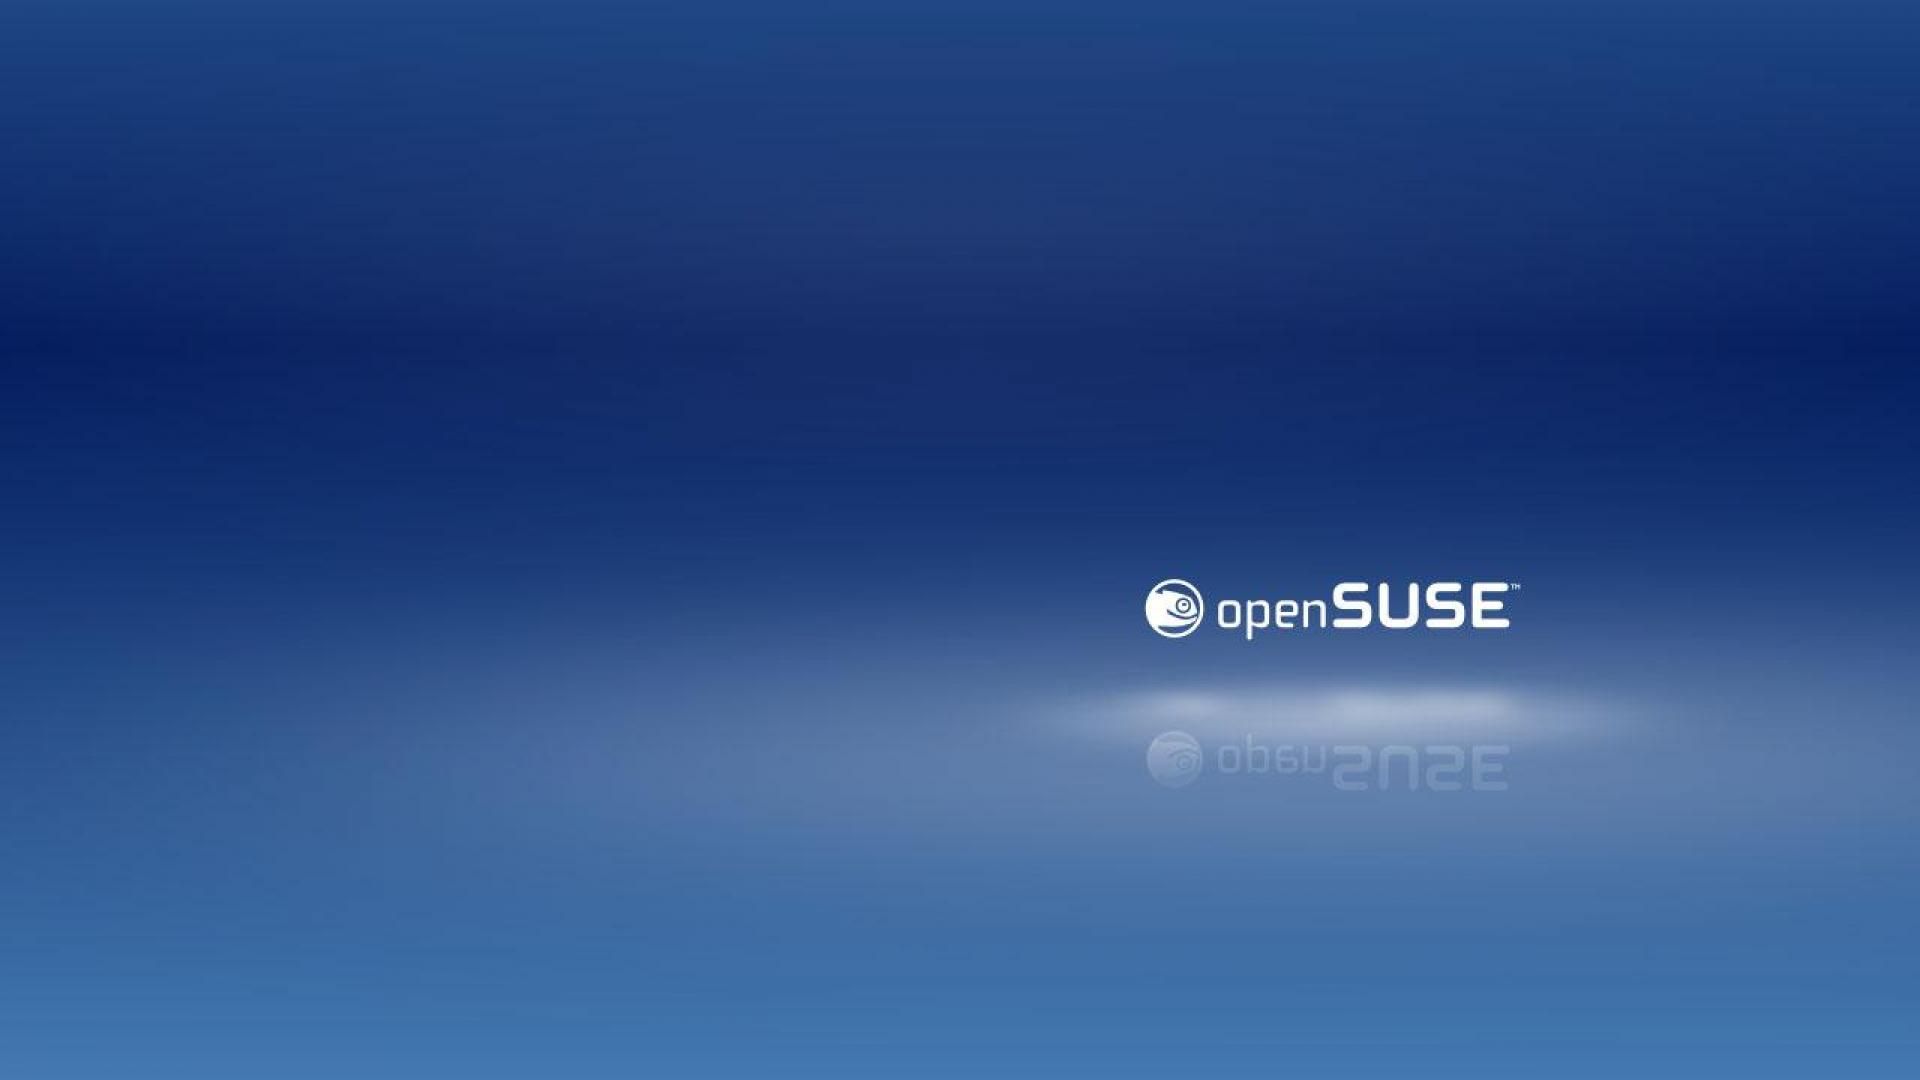 OPENSUSE WALLPAPER - (#32924) - HD Wallpapers - [wallpapersinhq.pw]